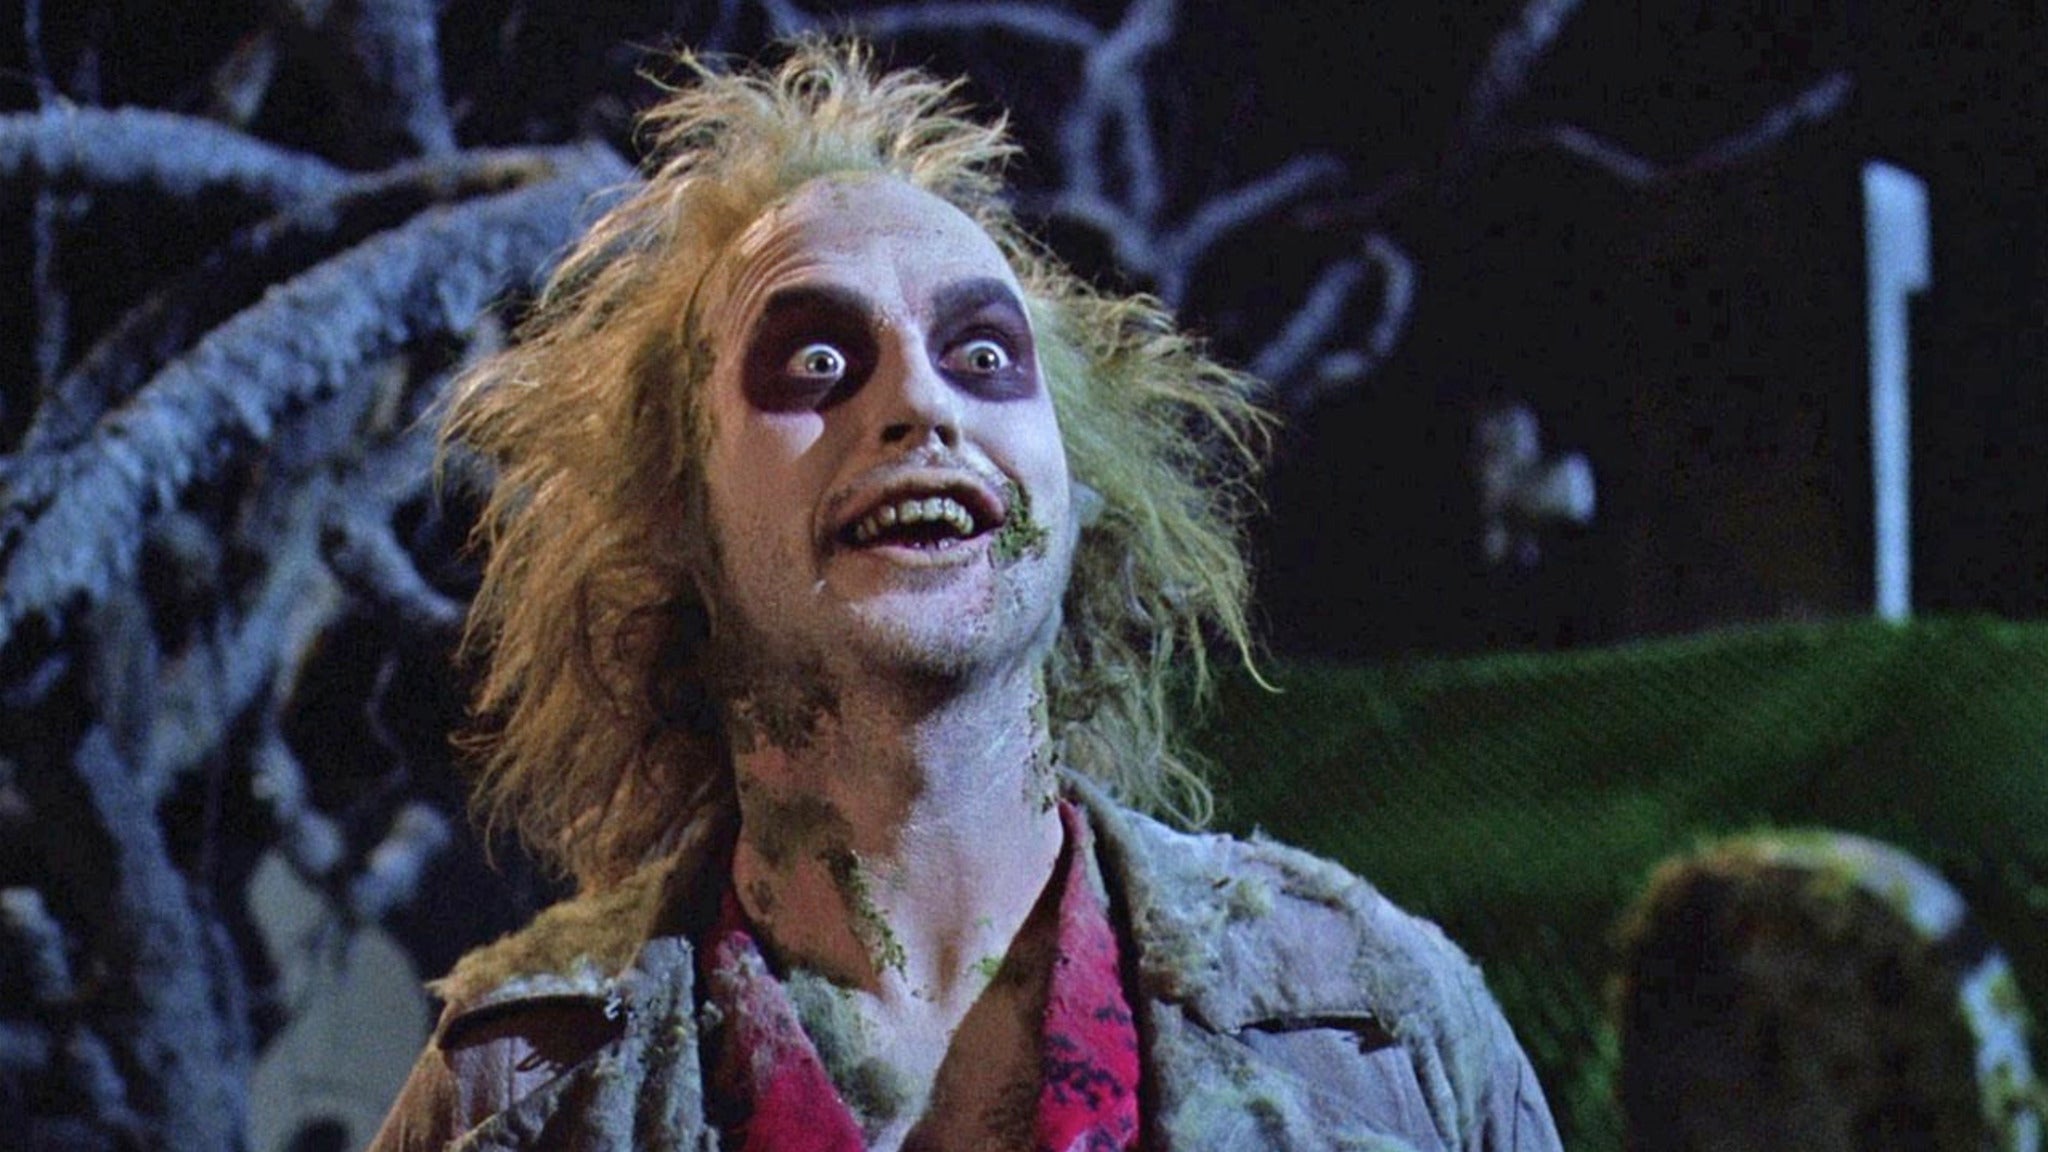 Beetlejuice at Dr. Phillips Performing Arts Center